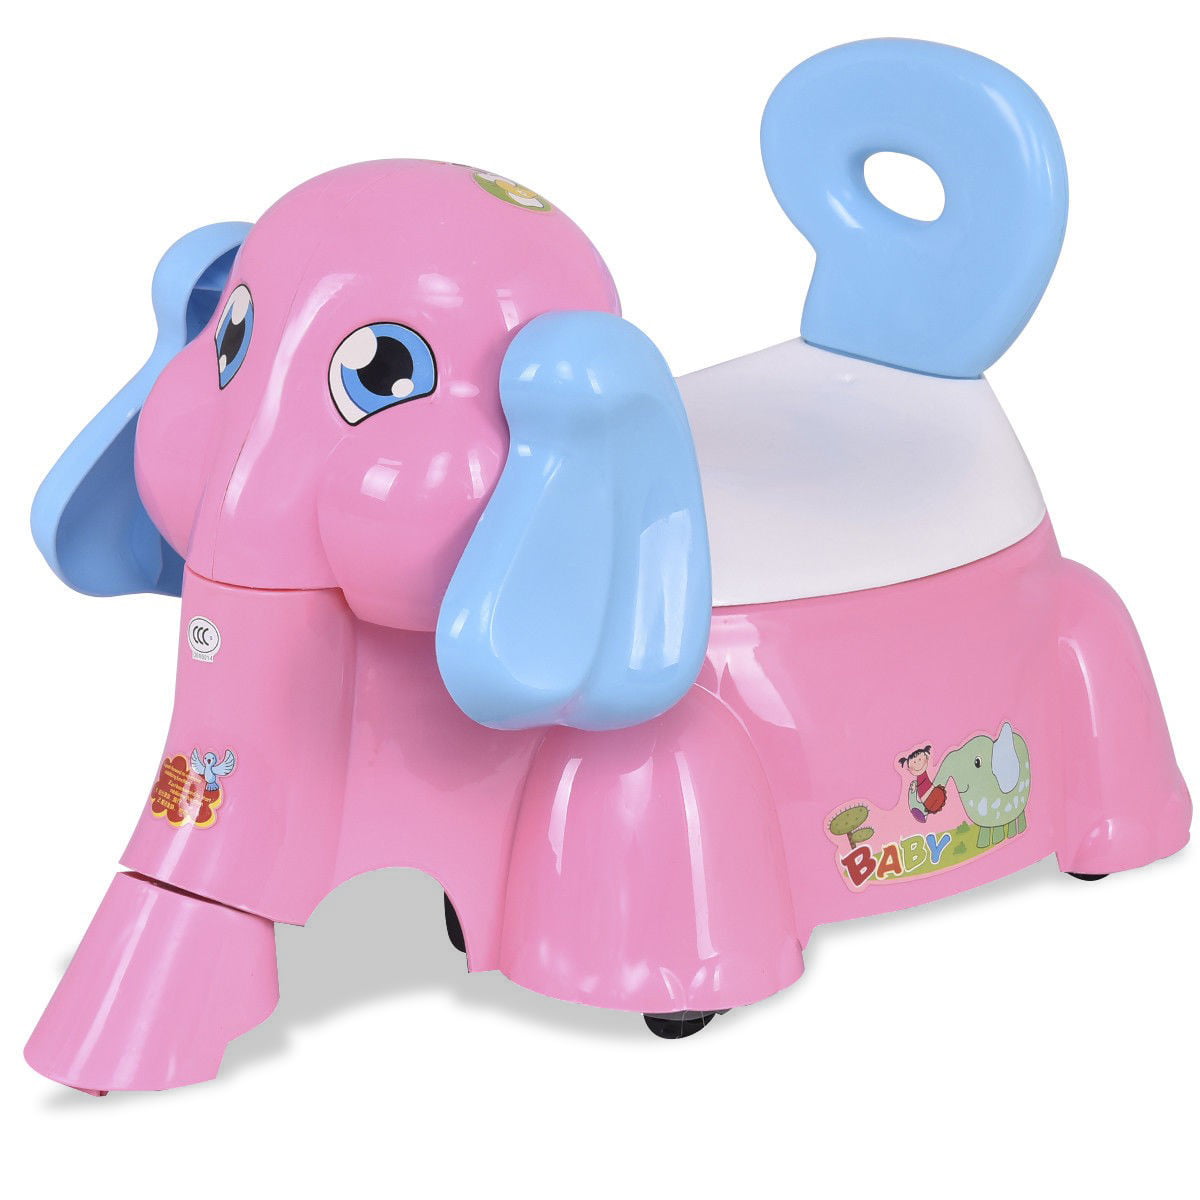 Elephant Shaped Baby Potty Training Toilet with Music Function ...